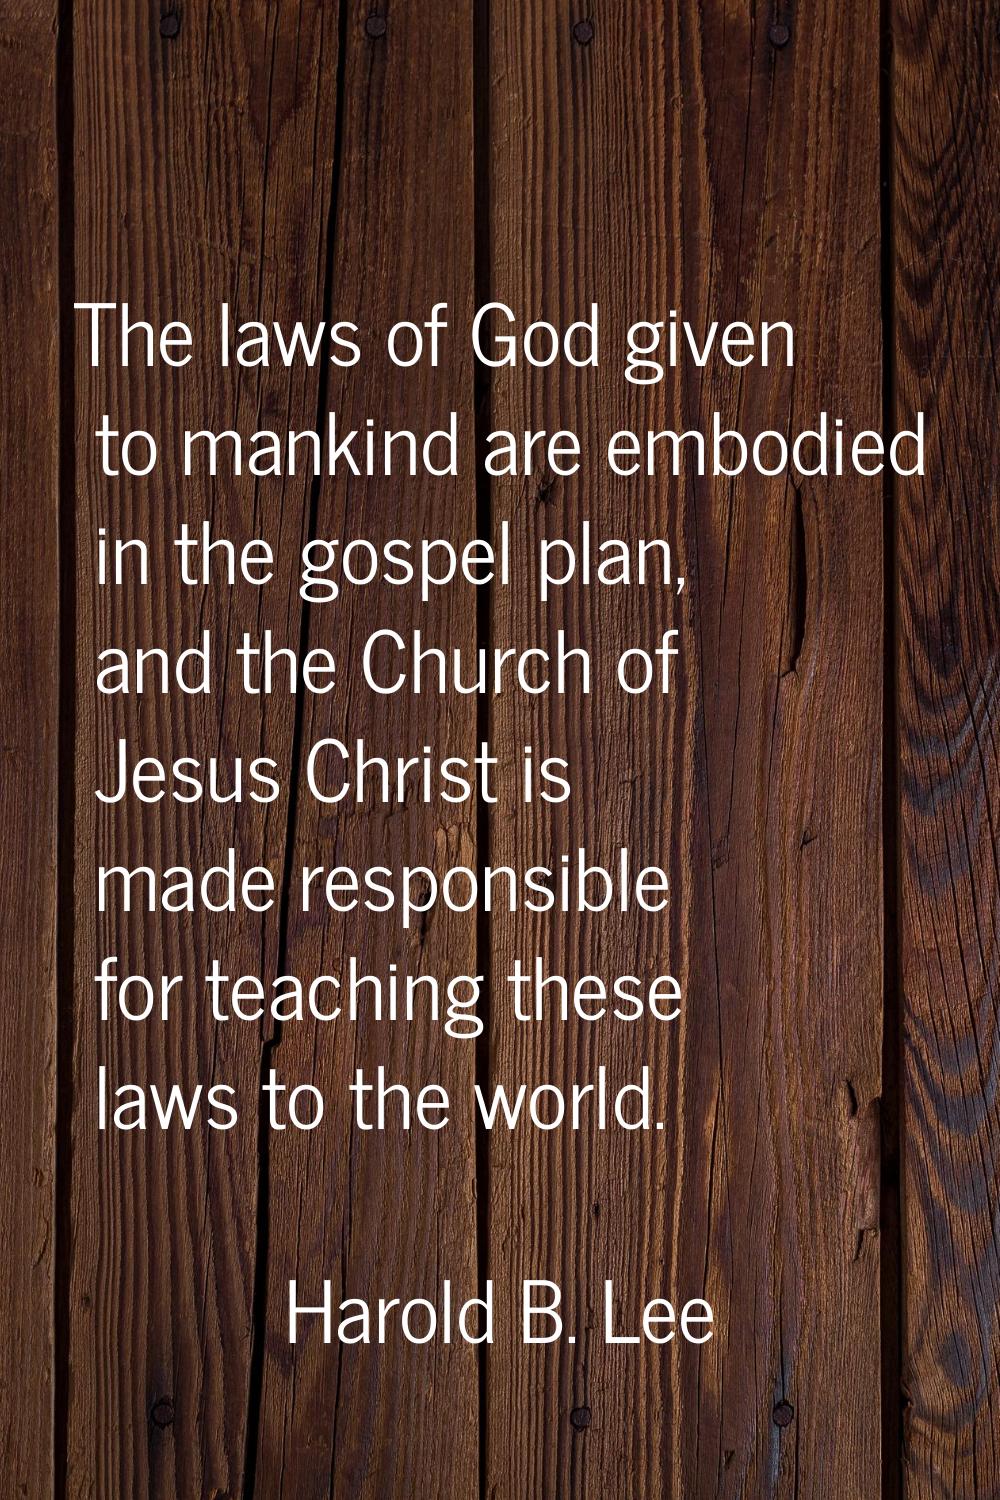 The laws of God given to mankind are embodied in the gospel plan, and the Church of Jesus Christ is